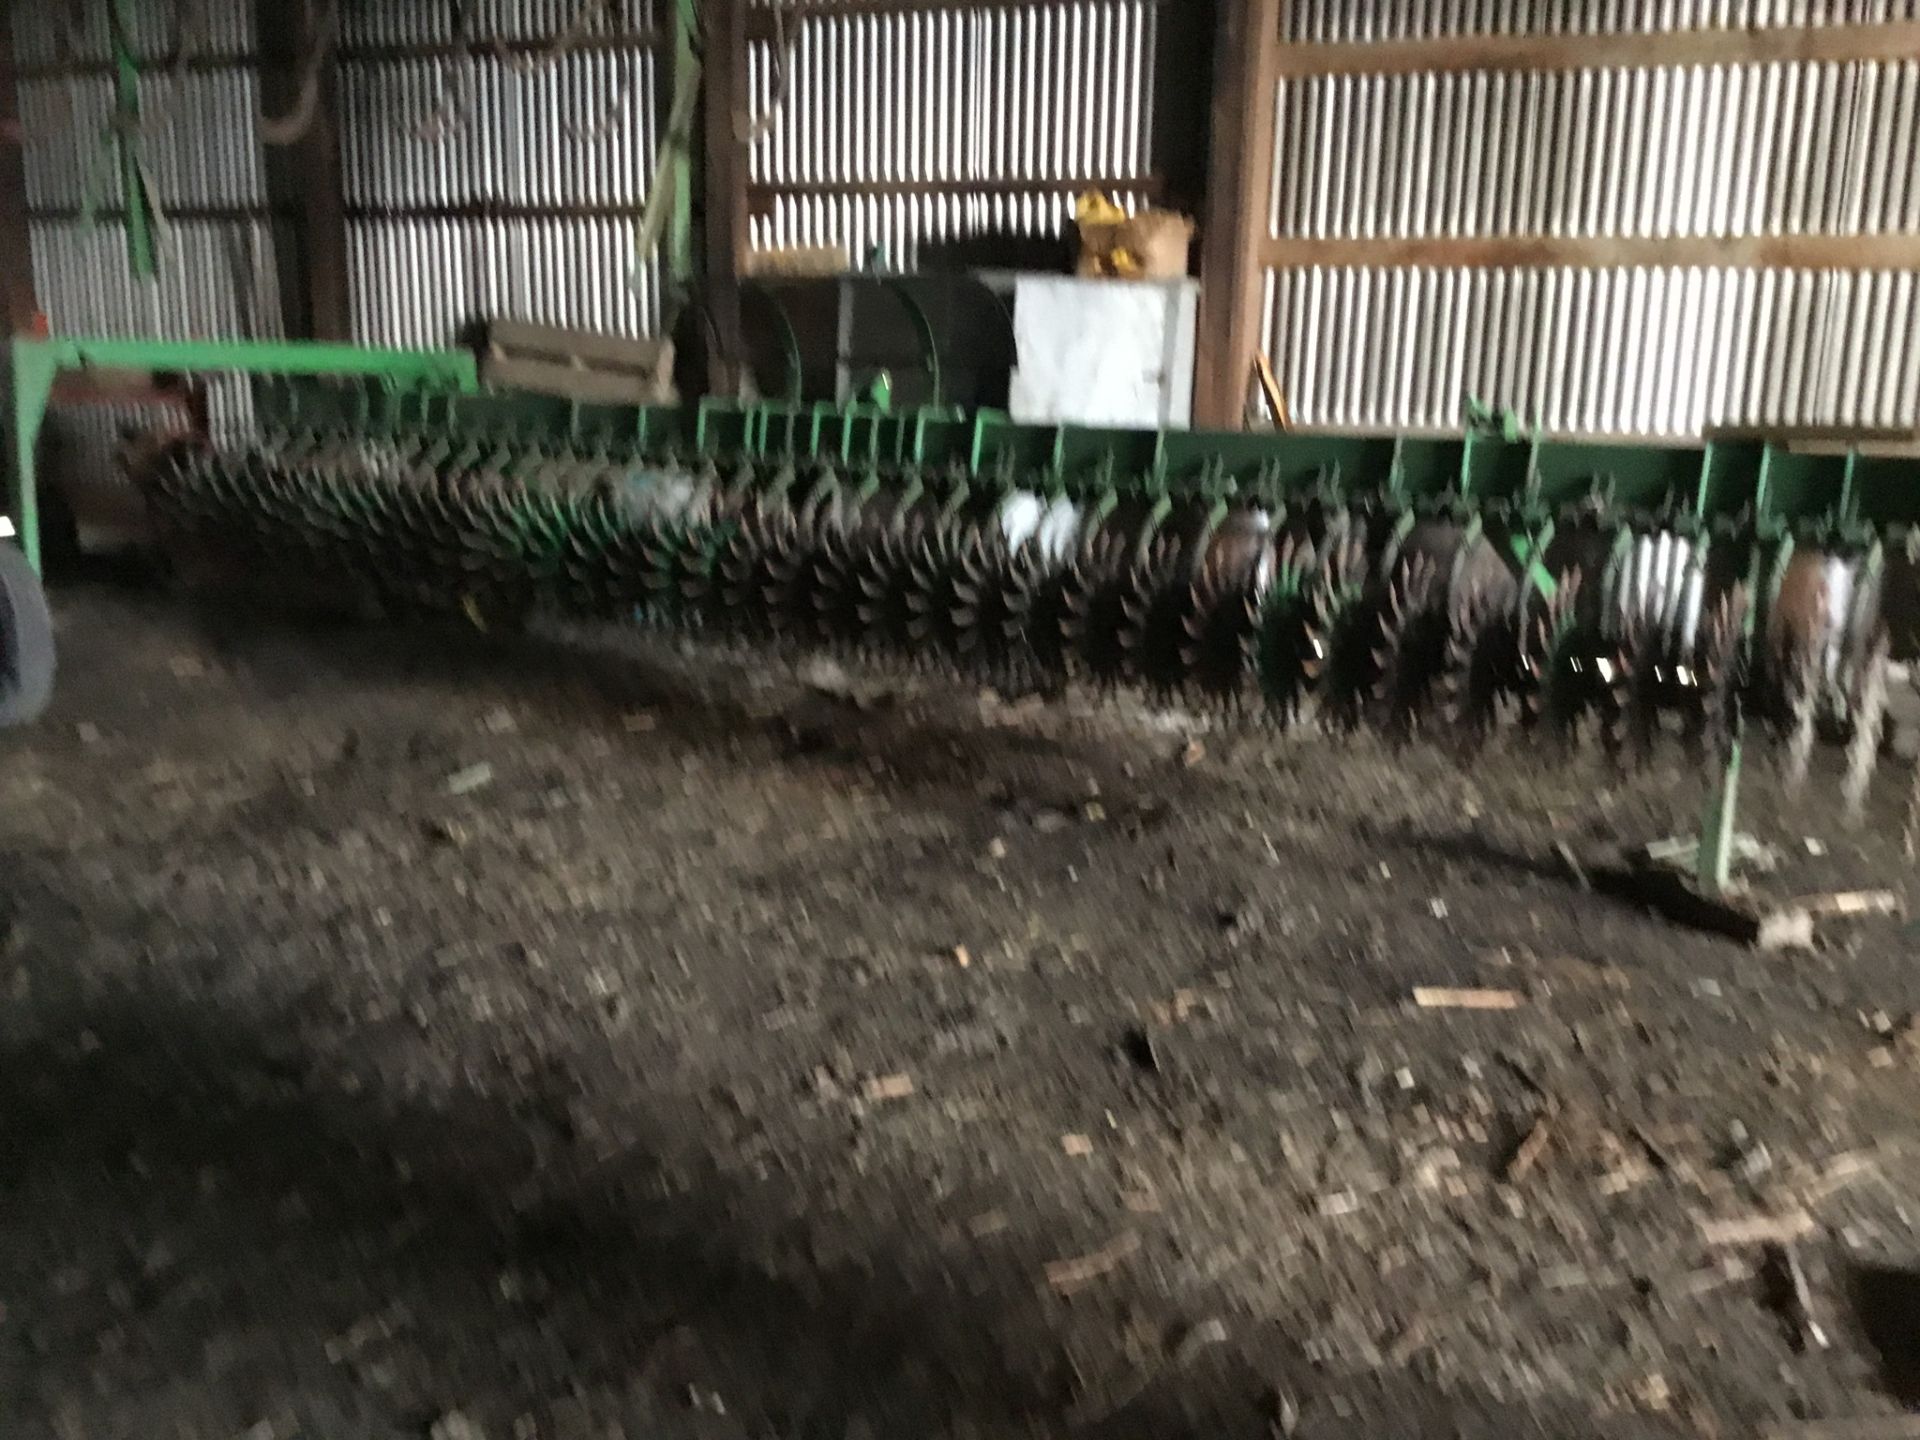 John Deere 20Ft. Rotary Hoe with Transport - Image 2 of 2